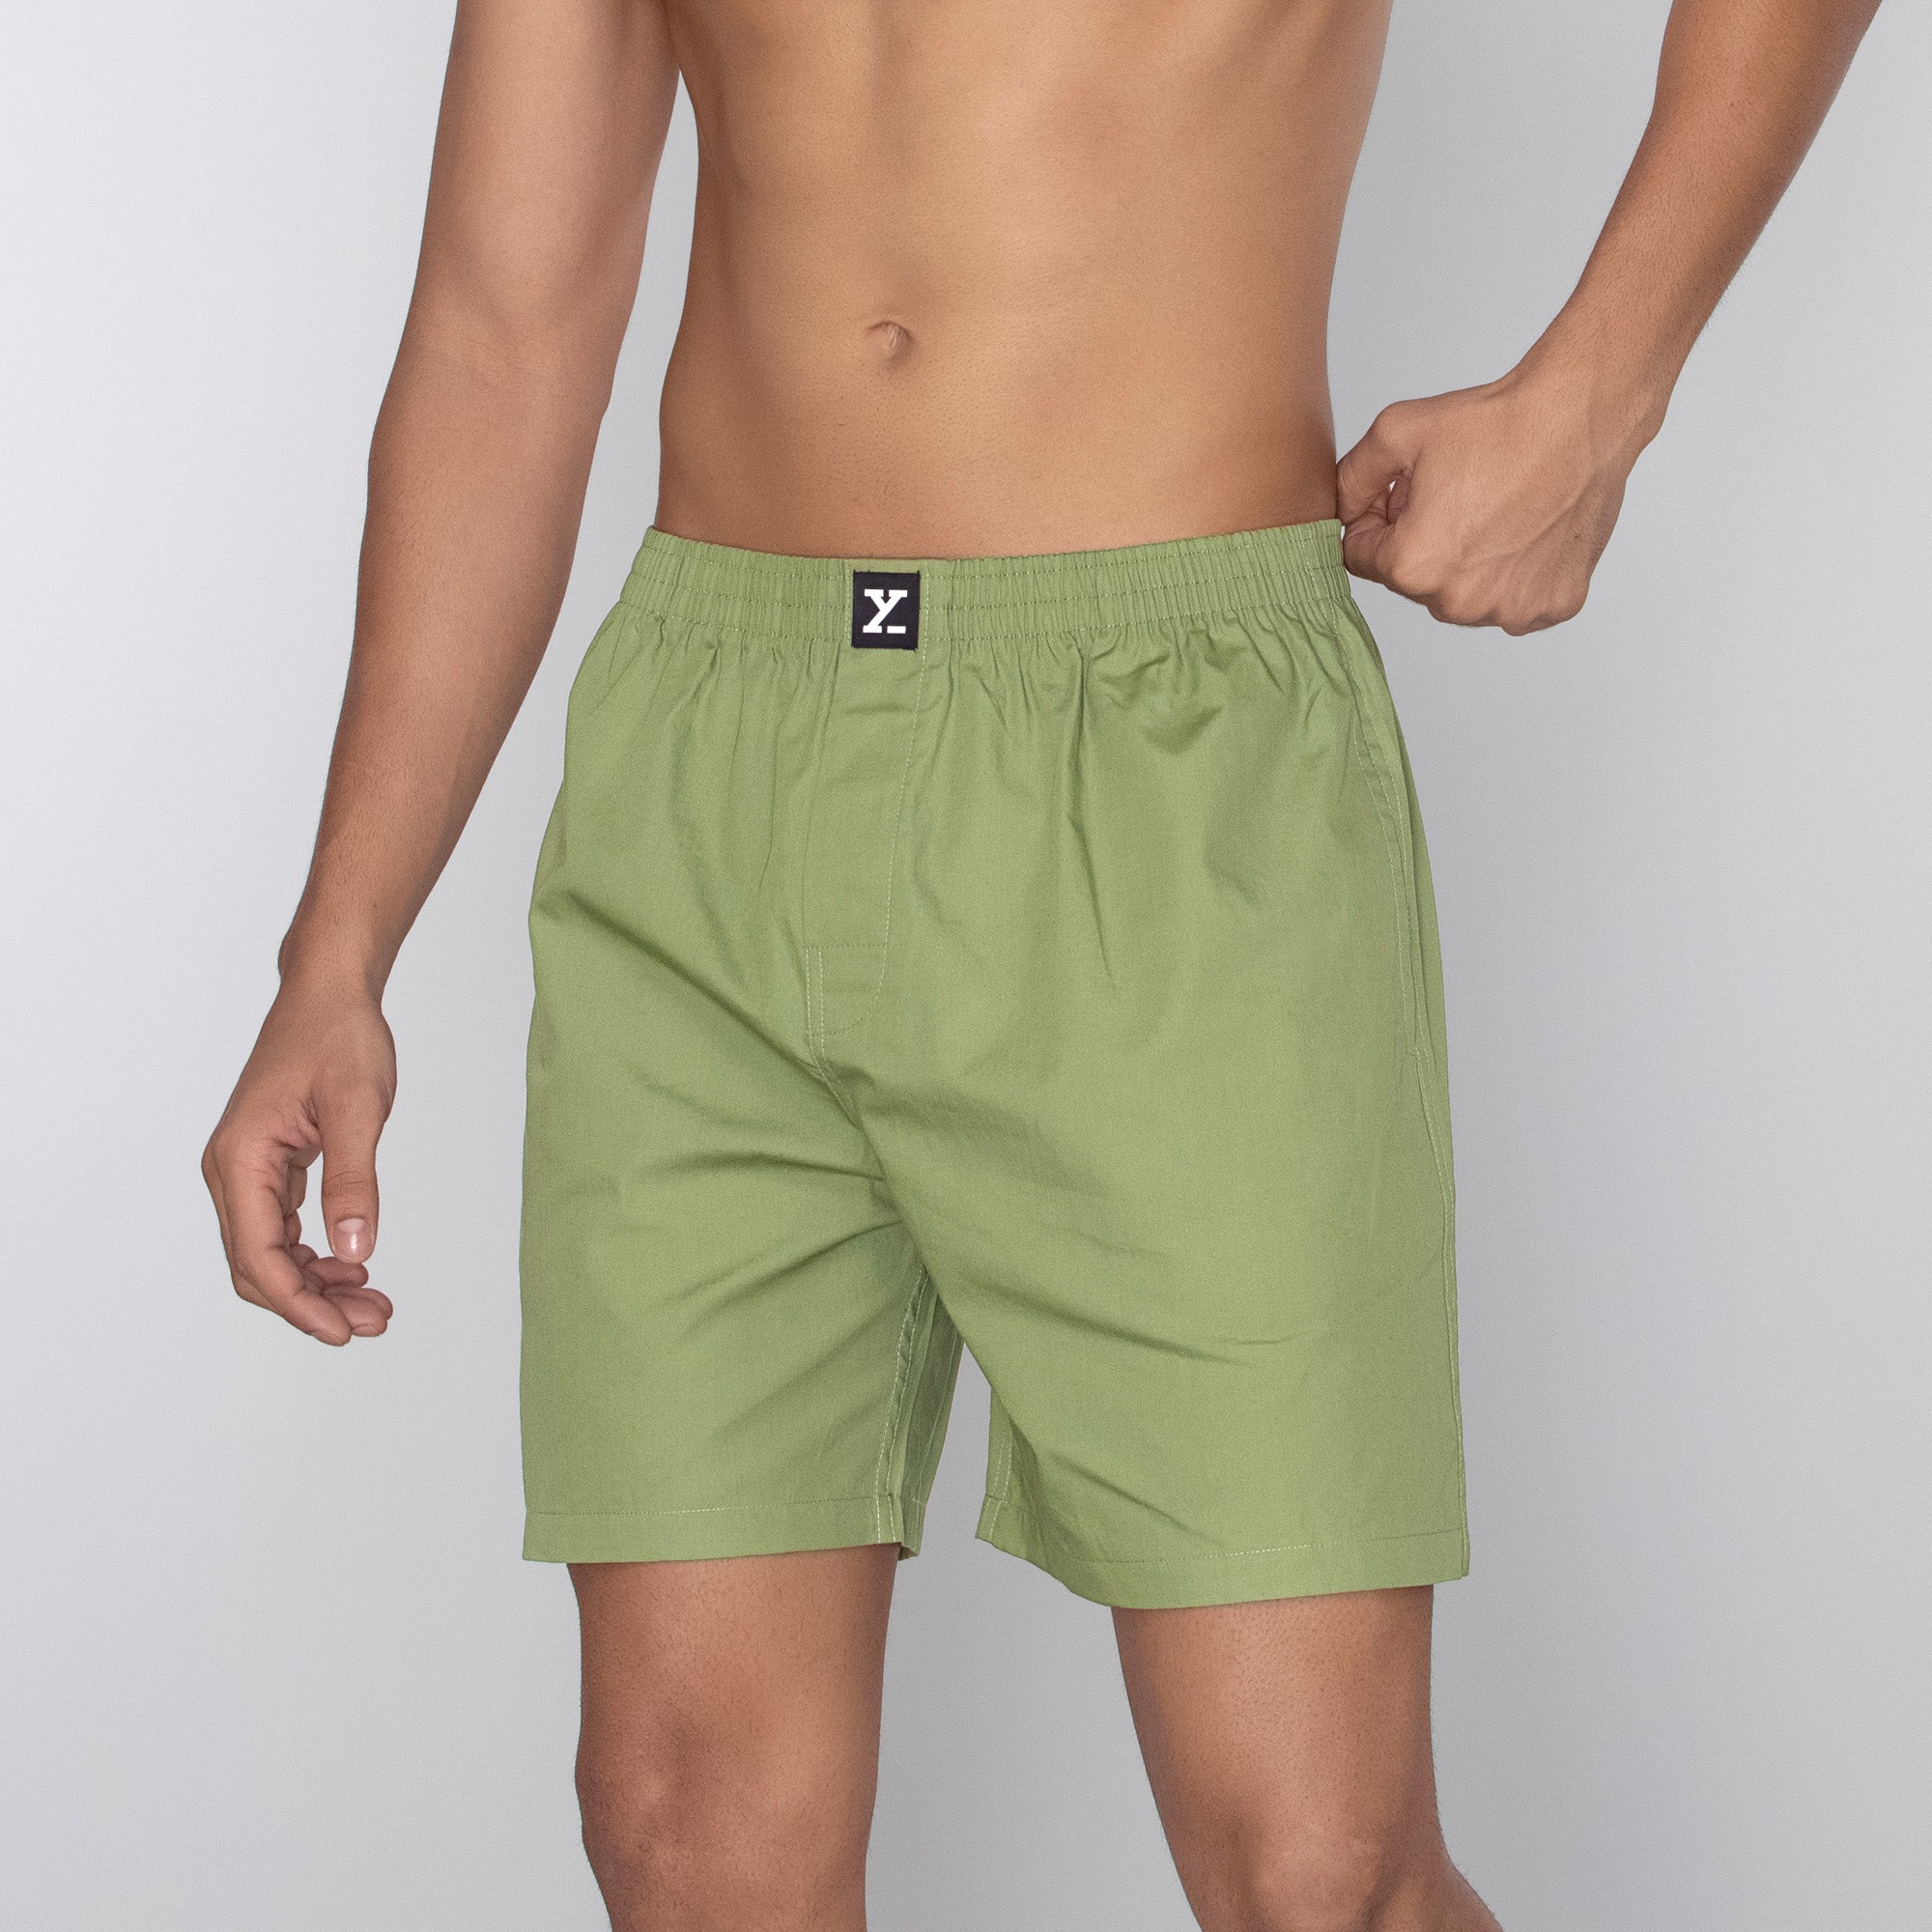 Pace Super Combed Cotton Boxer Shorts For Men Olive Green - XYXX Mens Apparels